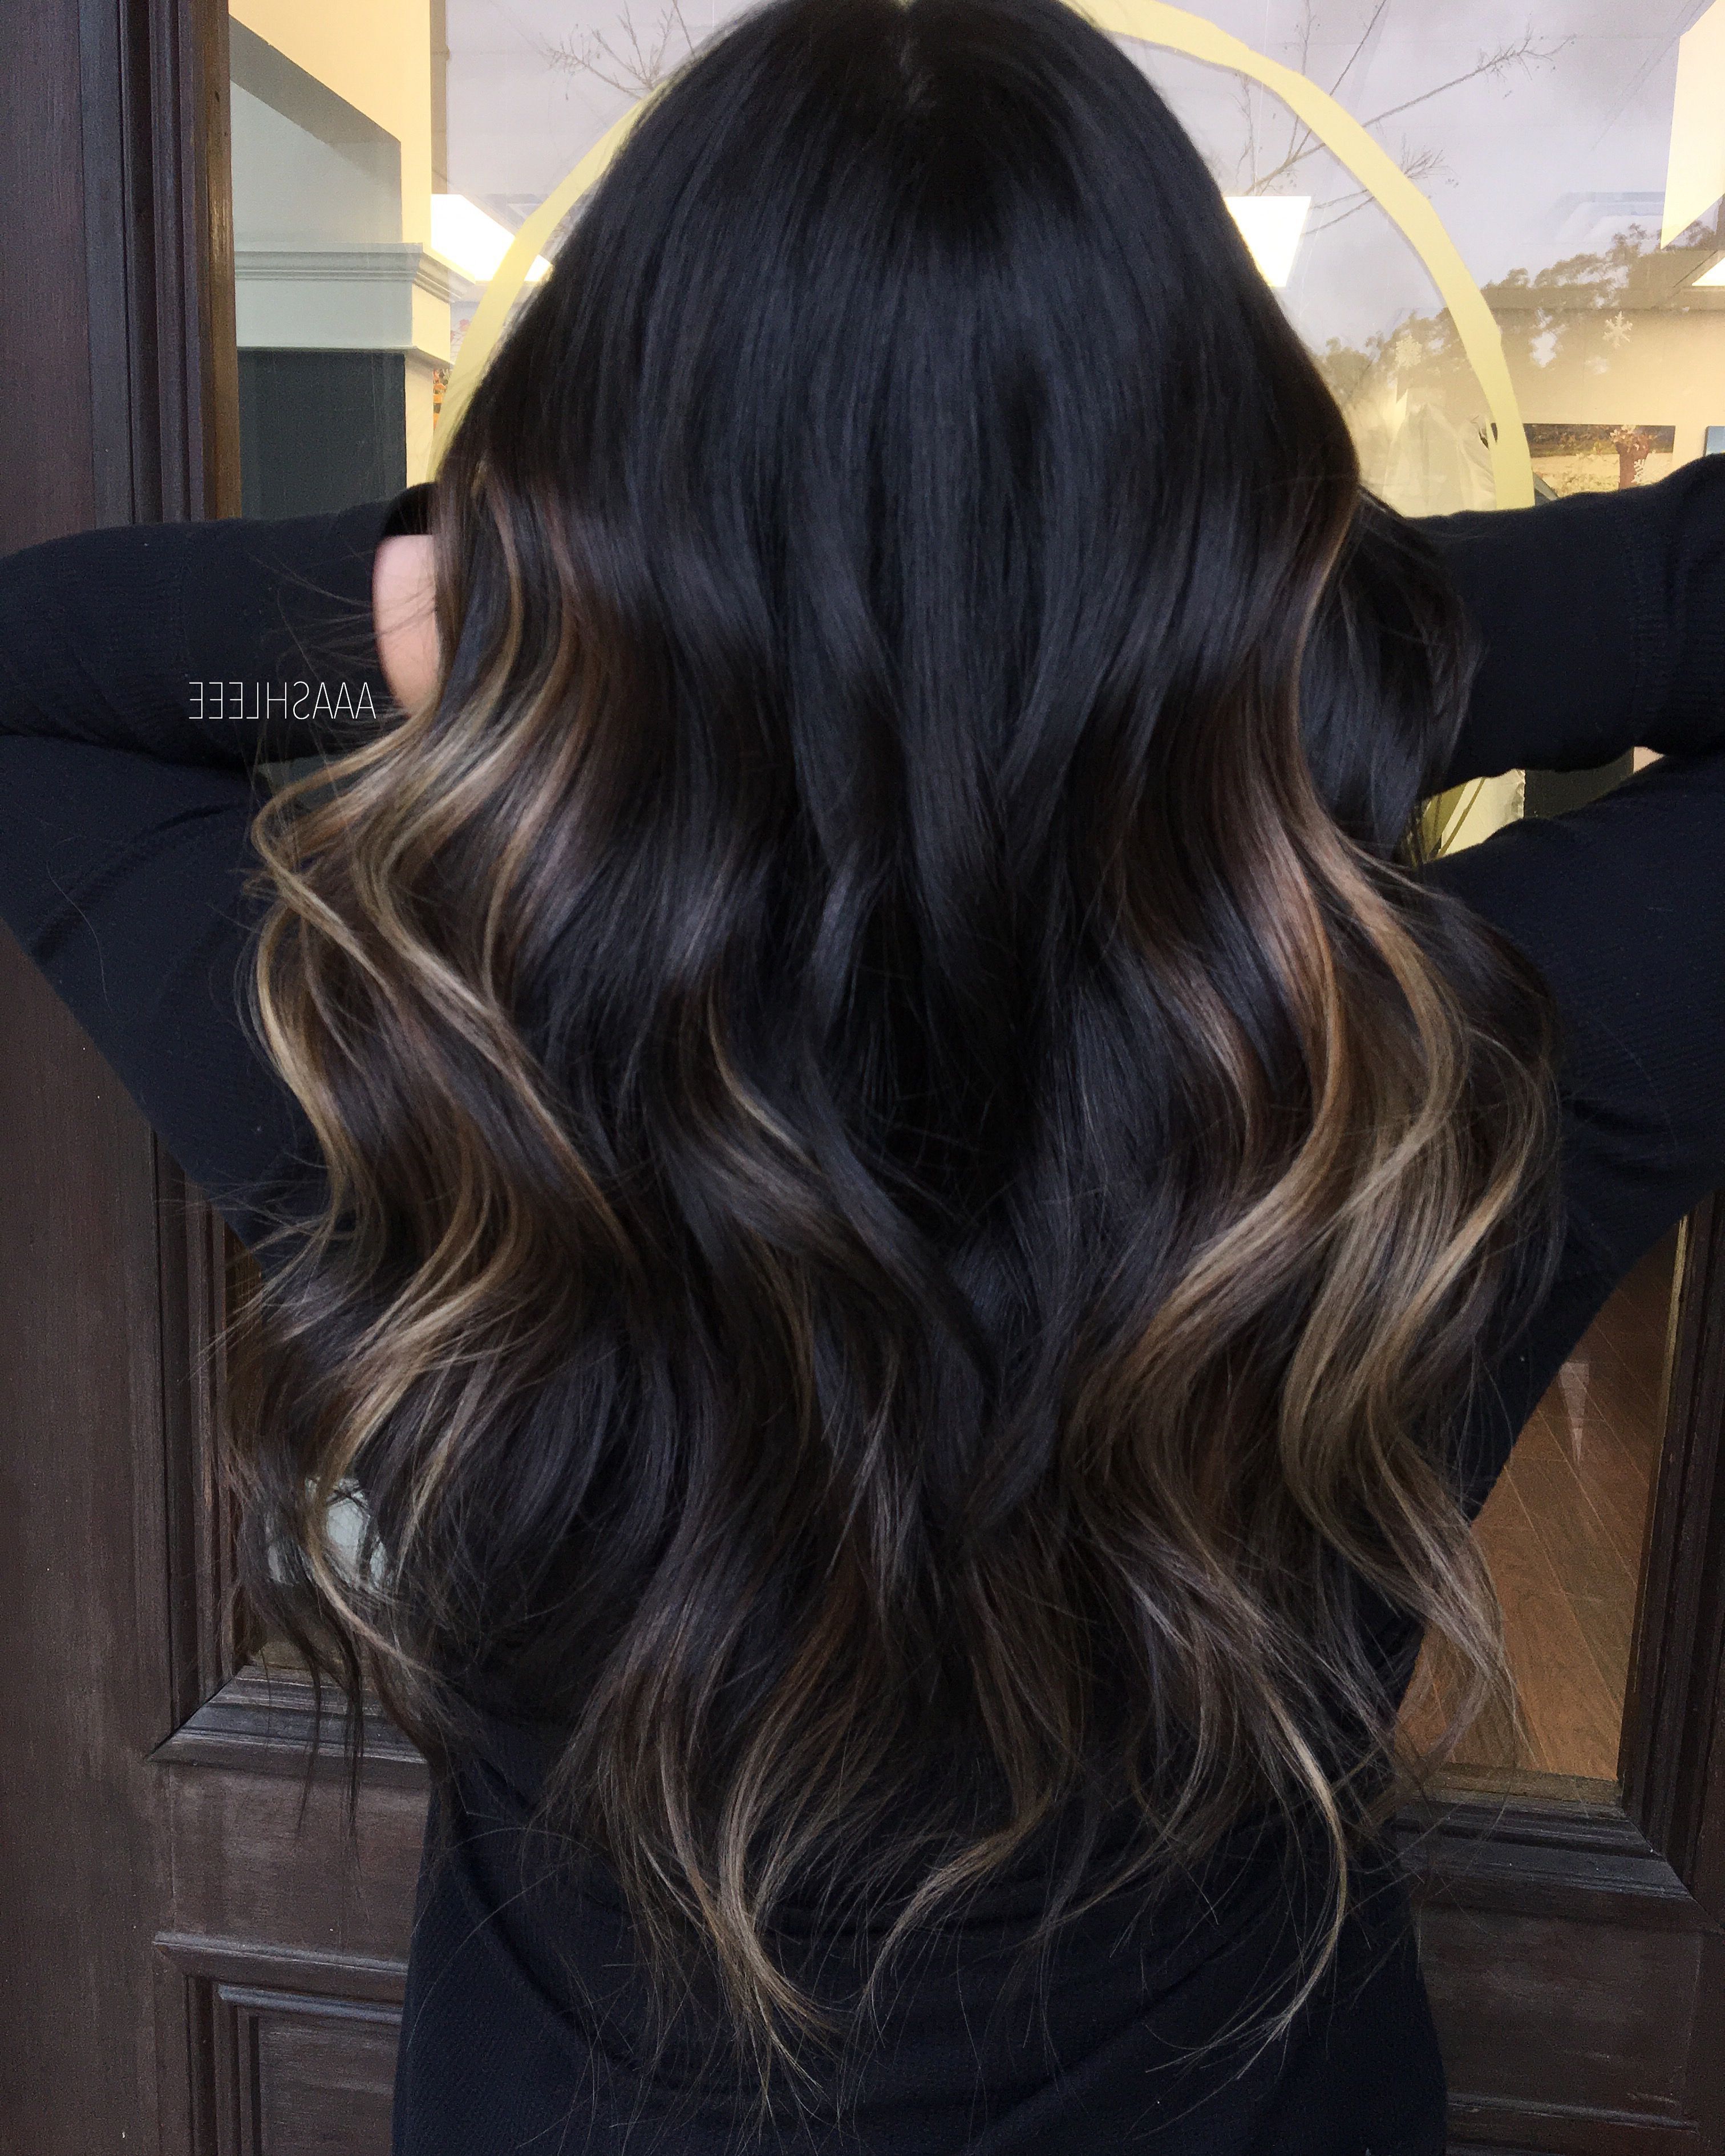 Pin On Hair@aaashleee Intended For Well Liked Long Waves Hairstyles With Subtle Highlights (View 6 of 20)